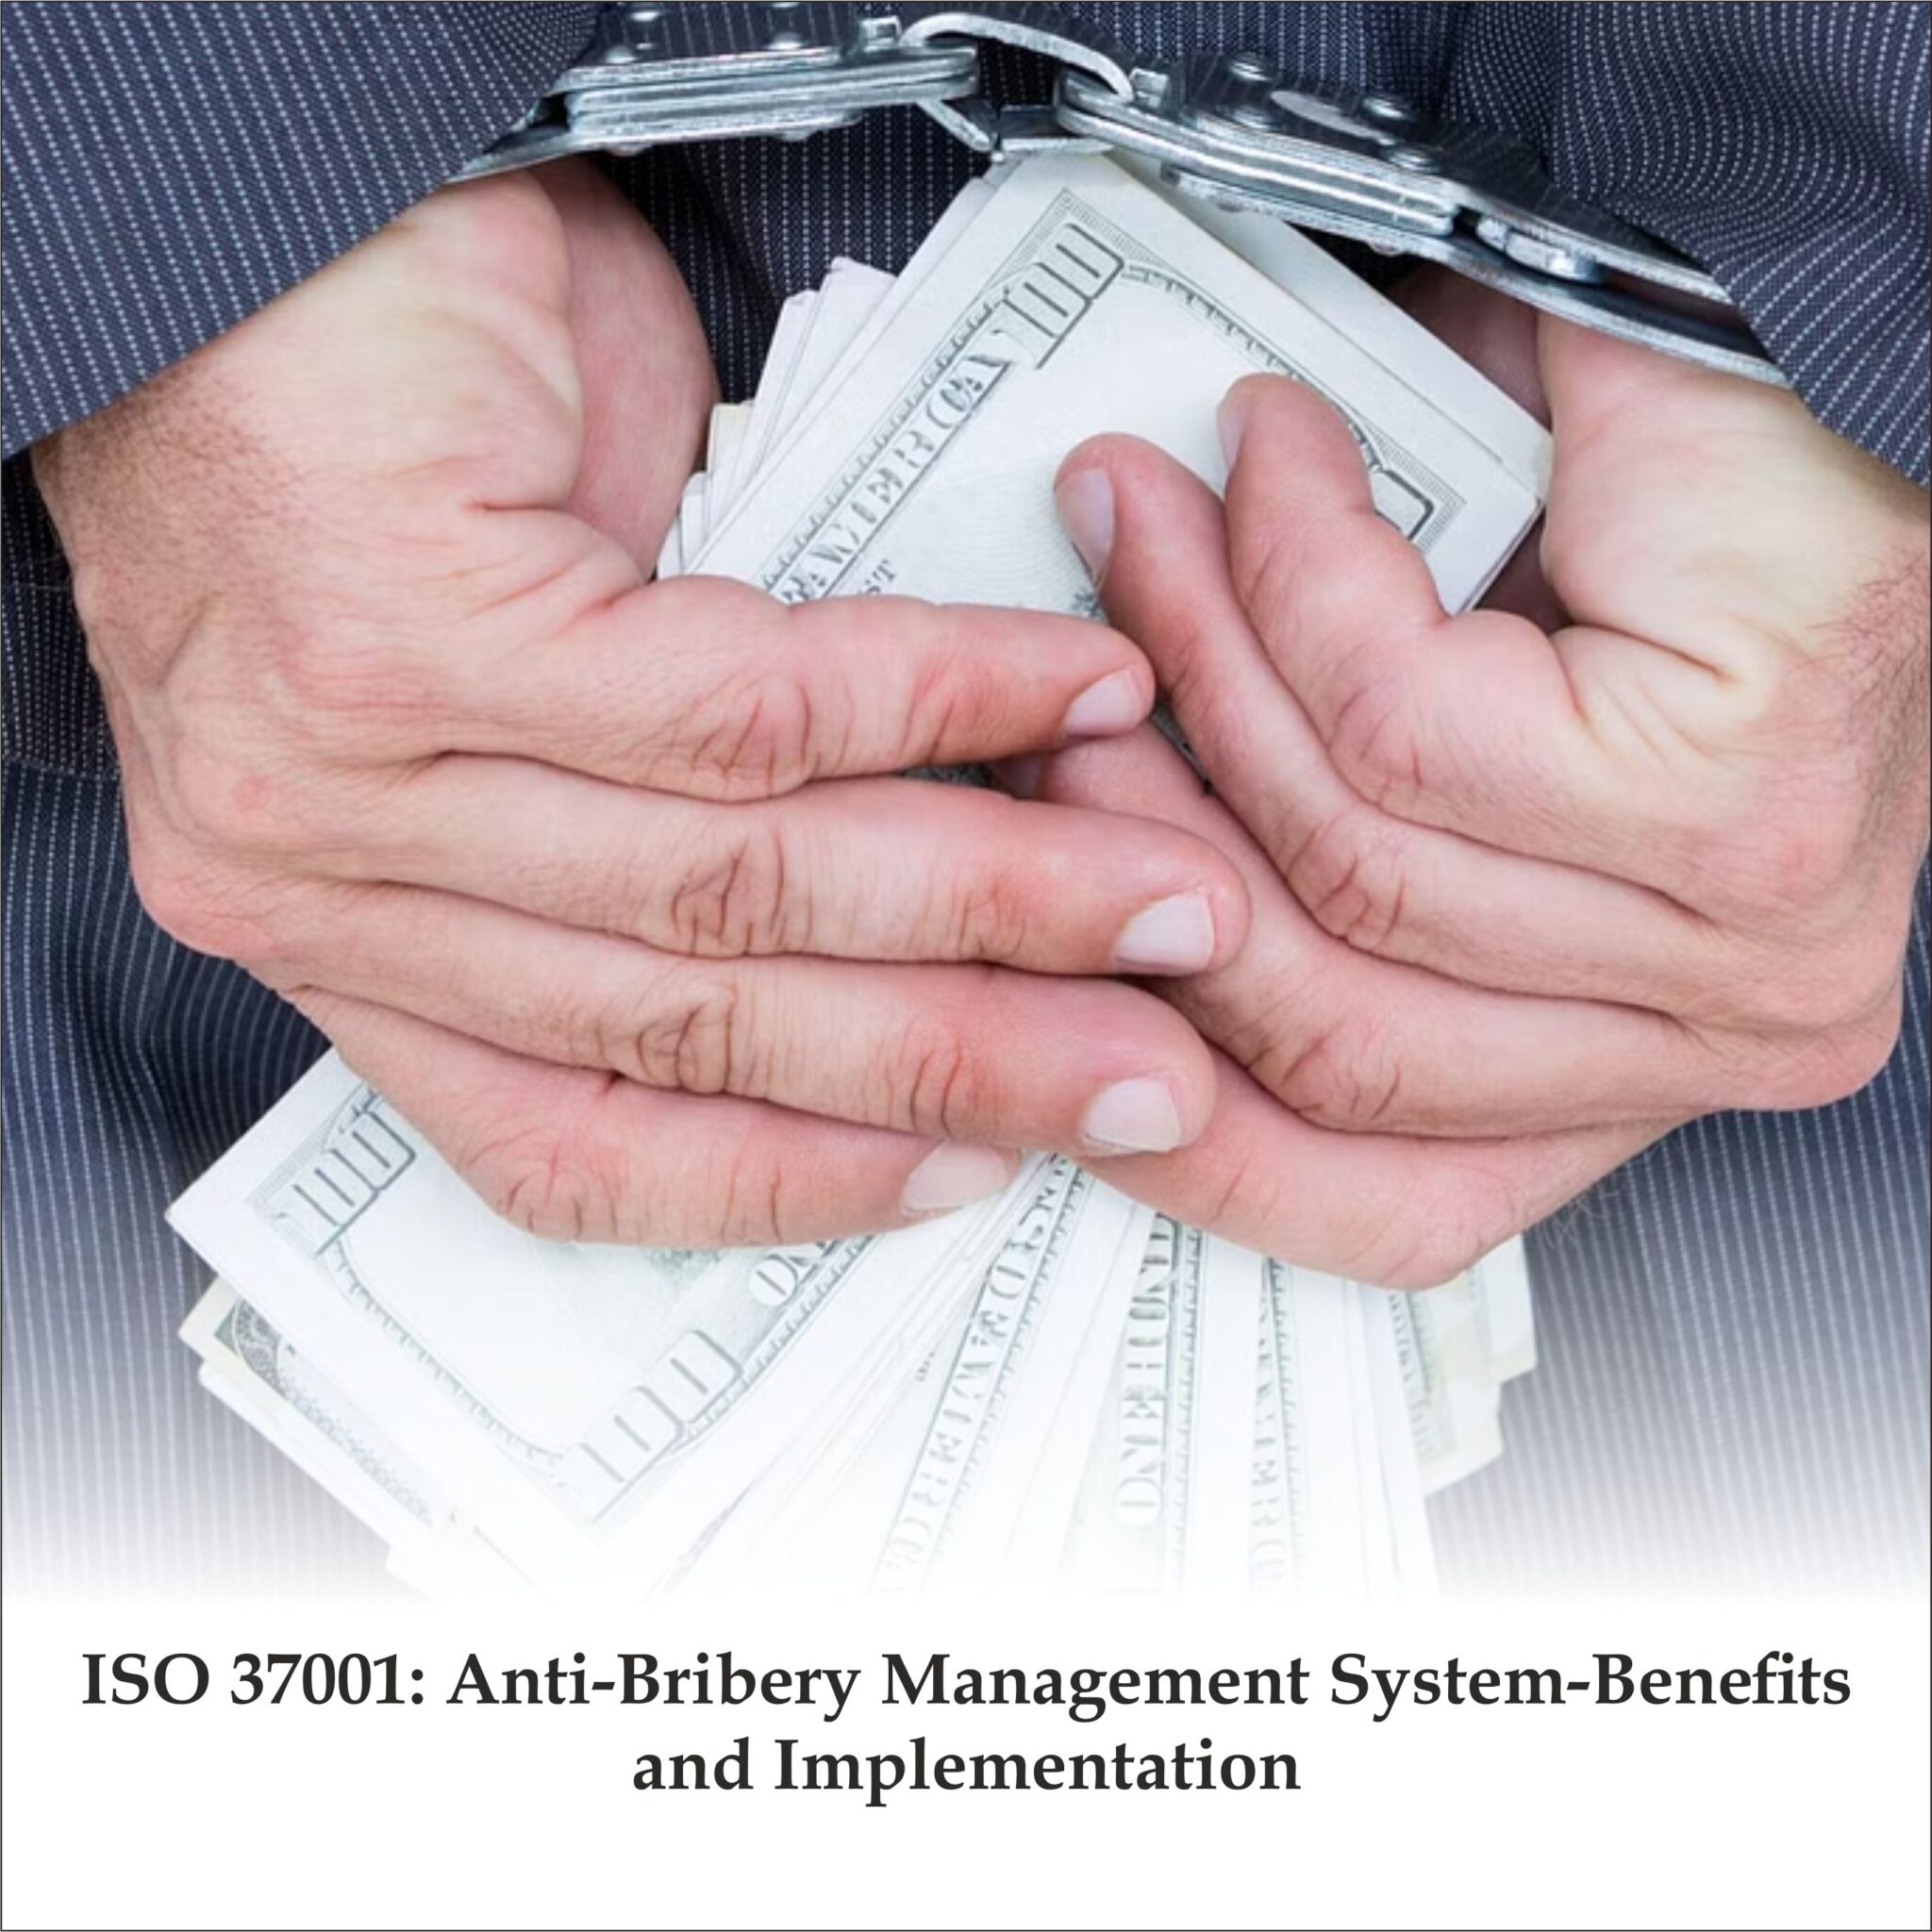 ISO 37001: Anti-Bribery Management System-Benefits and Implementation